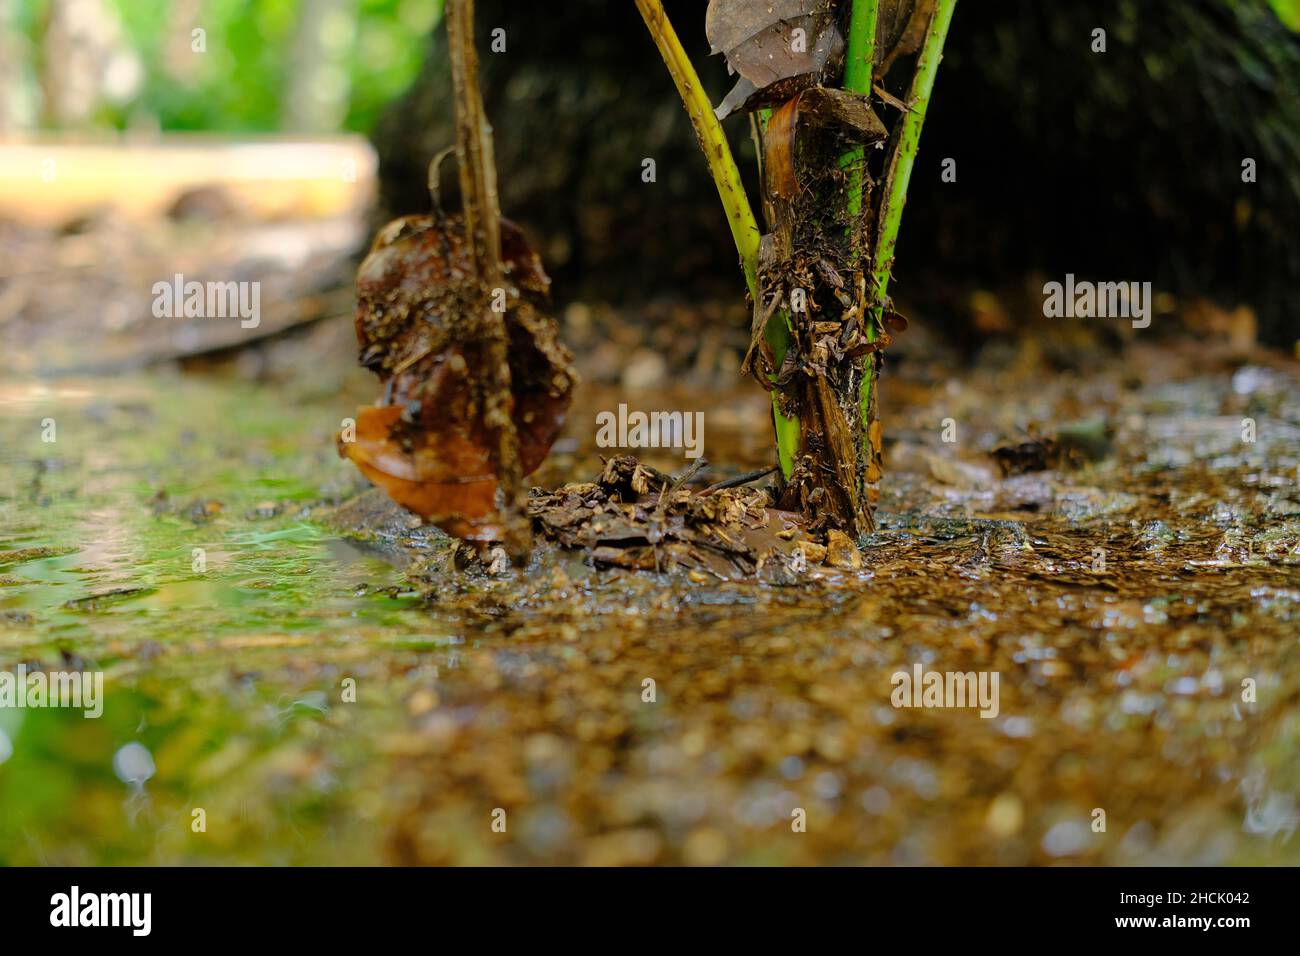 Coconut shoots that grow from seeds are submerged in water Stock Photo